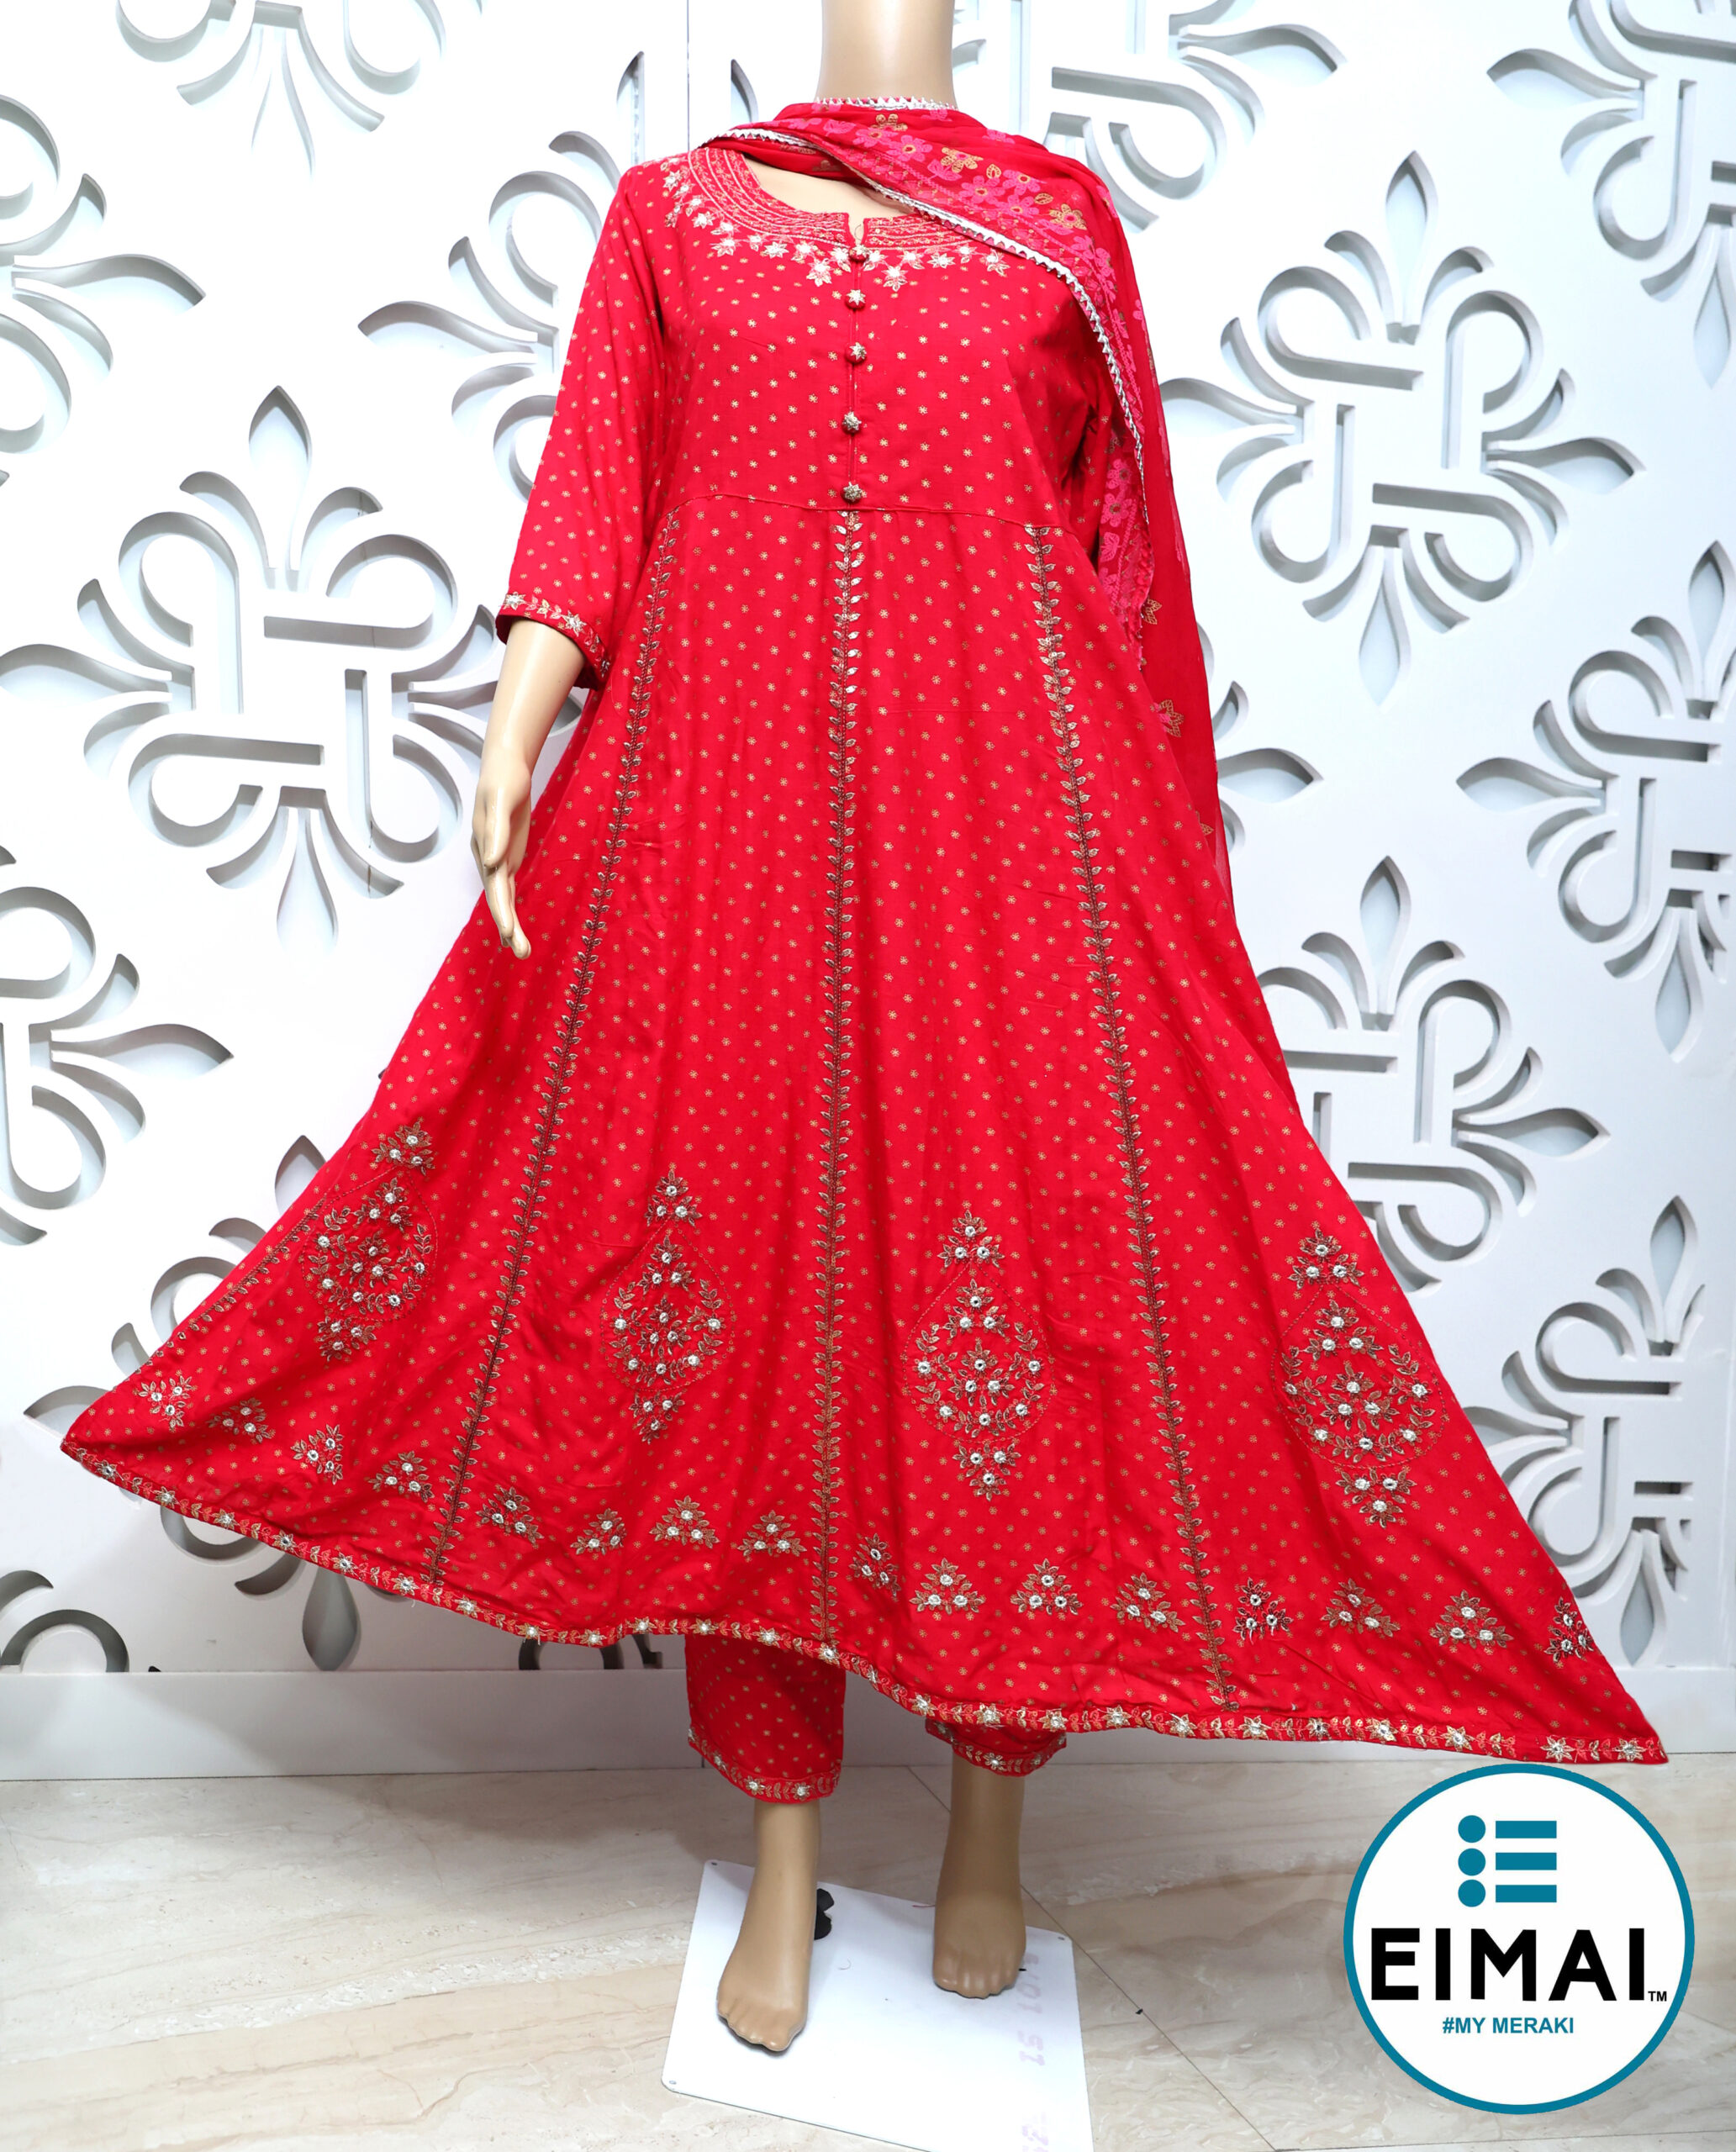 Fantastic Red Rayon Cotton With Samosa Lace Button Kurti And Designer Rayon  Cotton Samosa Lace Plazo in India  RJ Fashion